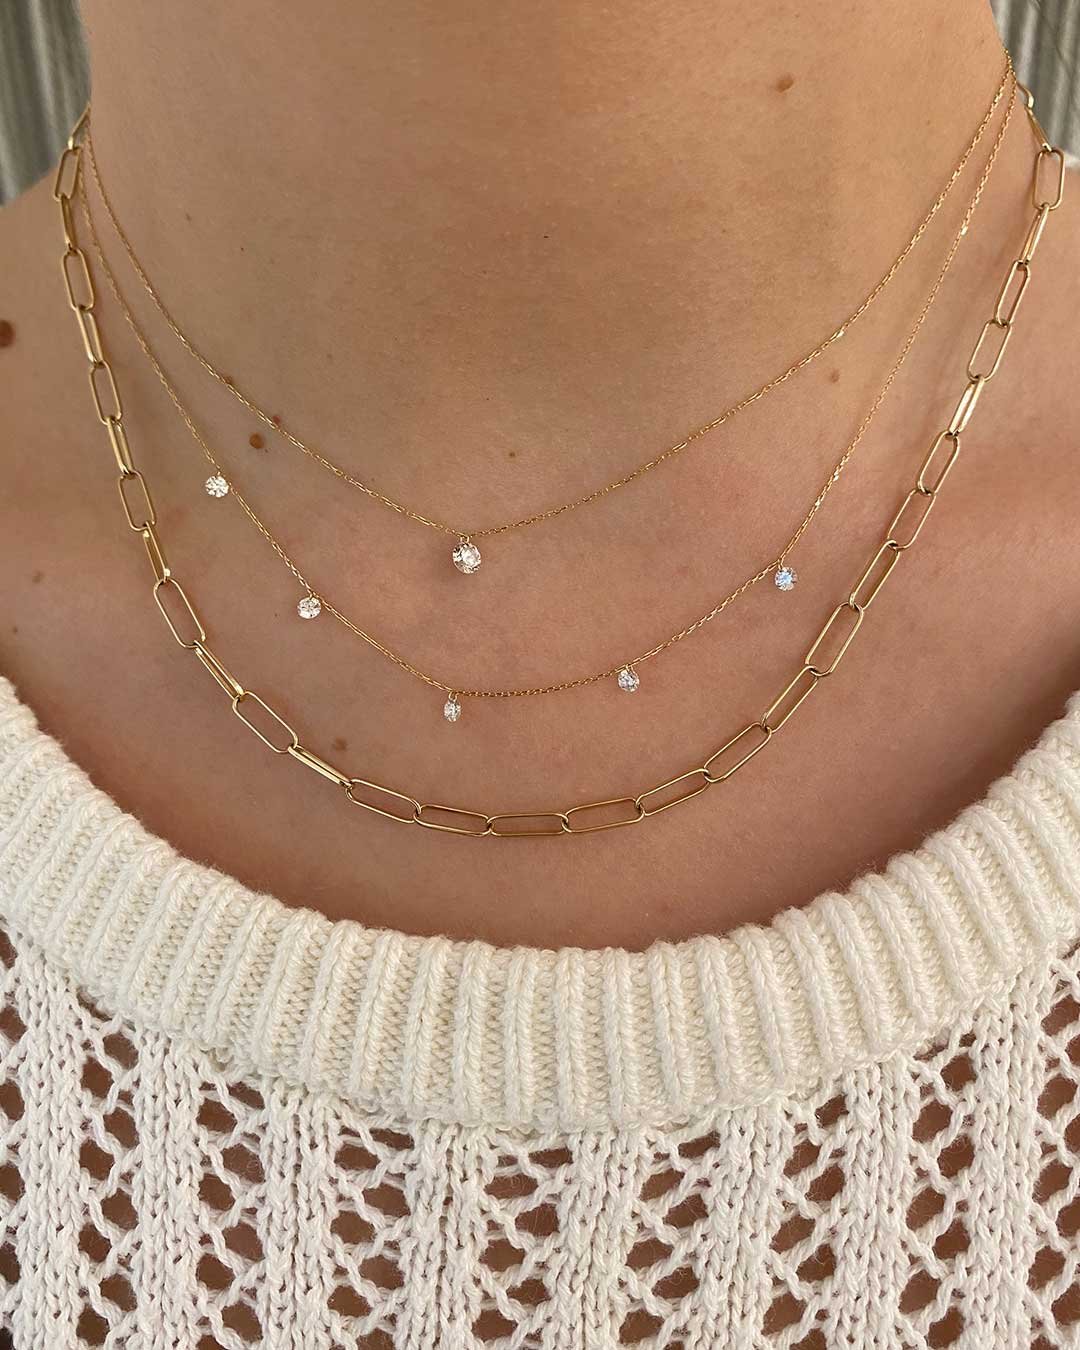 Stylist wearing The Floating Diamond Statement Necklace, Floating Diamond Flutter Necklace and 14k Gold Parker Necklace.  